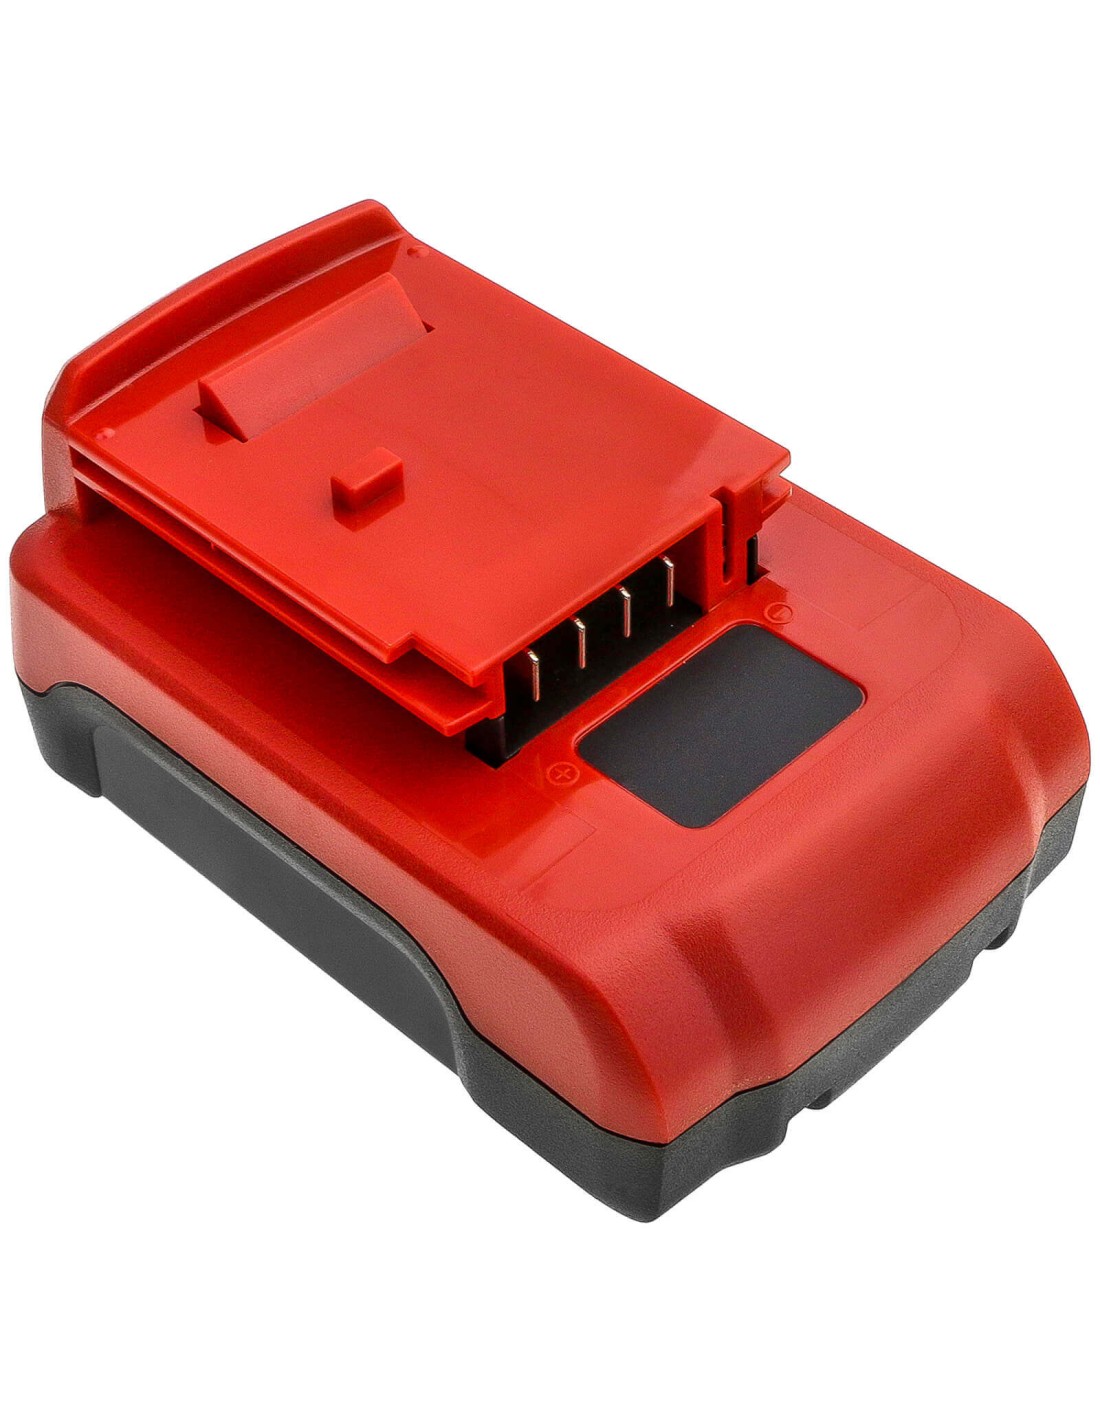 Battery for Porter Cable, Pc1800d, Pc1800l, Pc1800rs 18V, 2500mAh - 45.00Wh